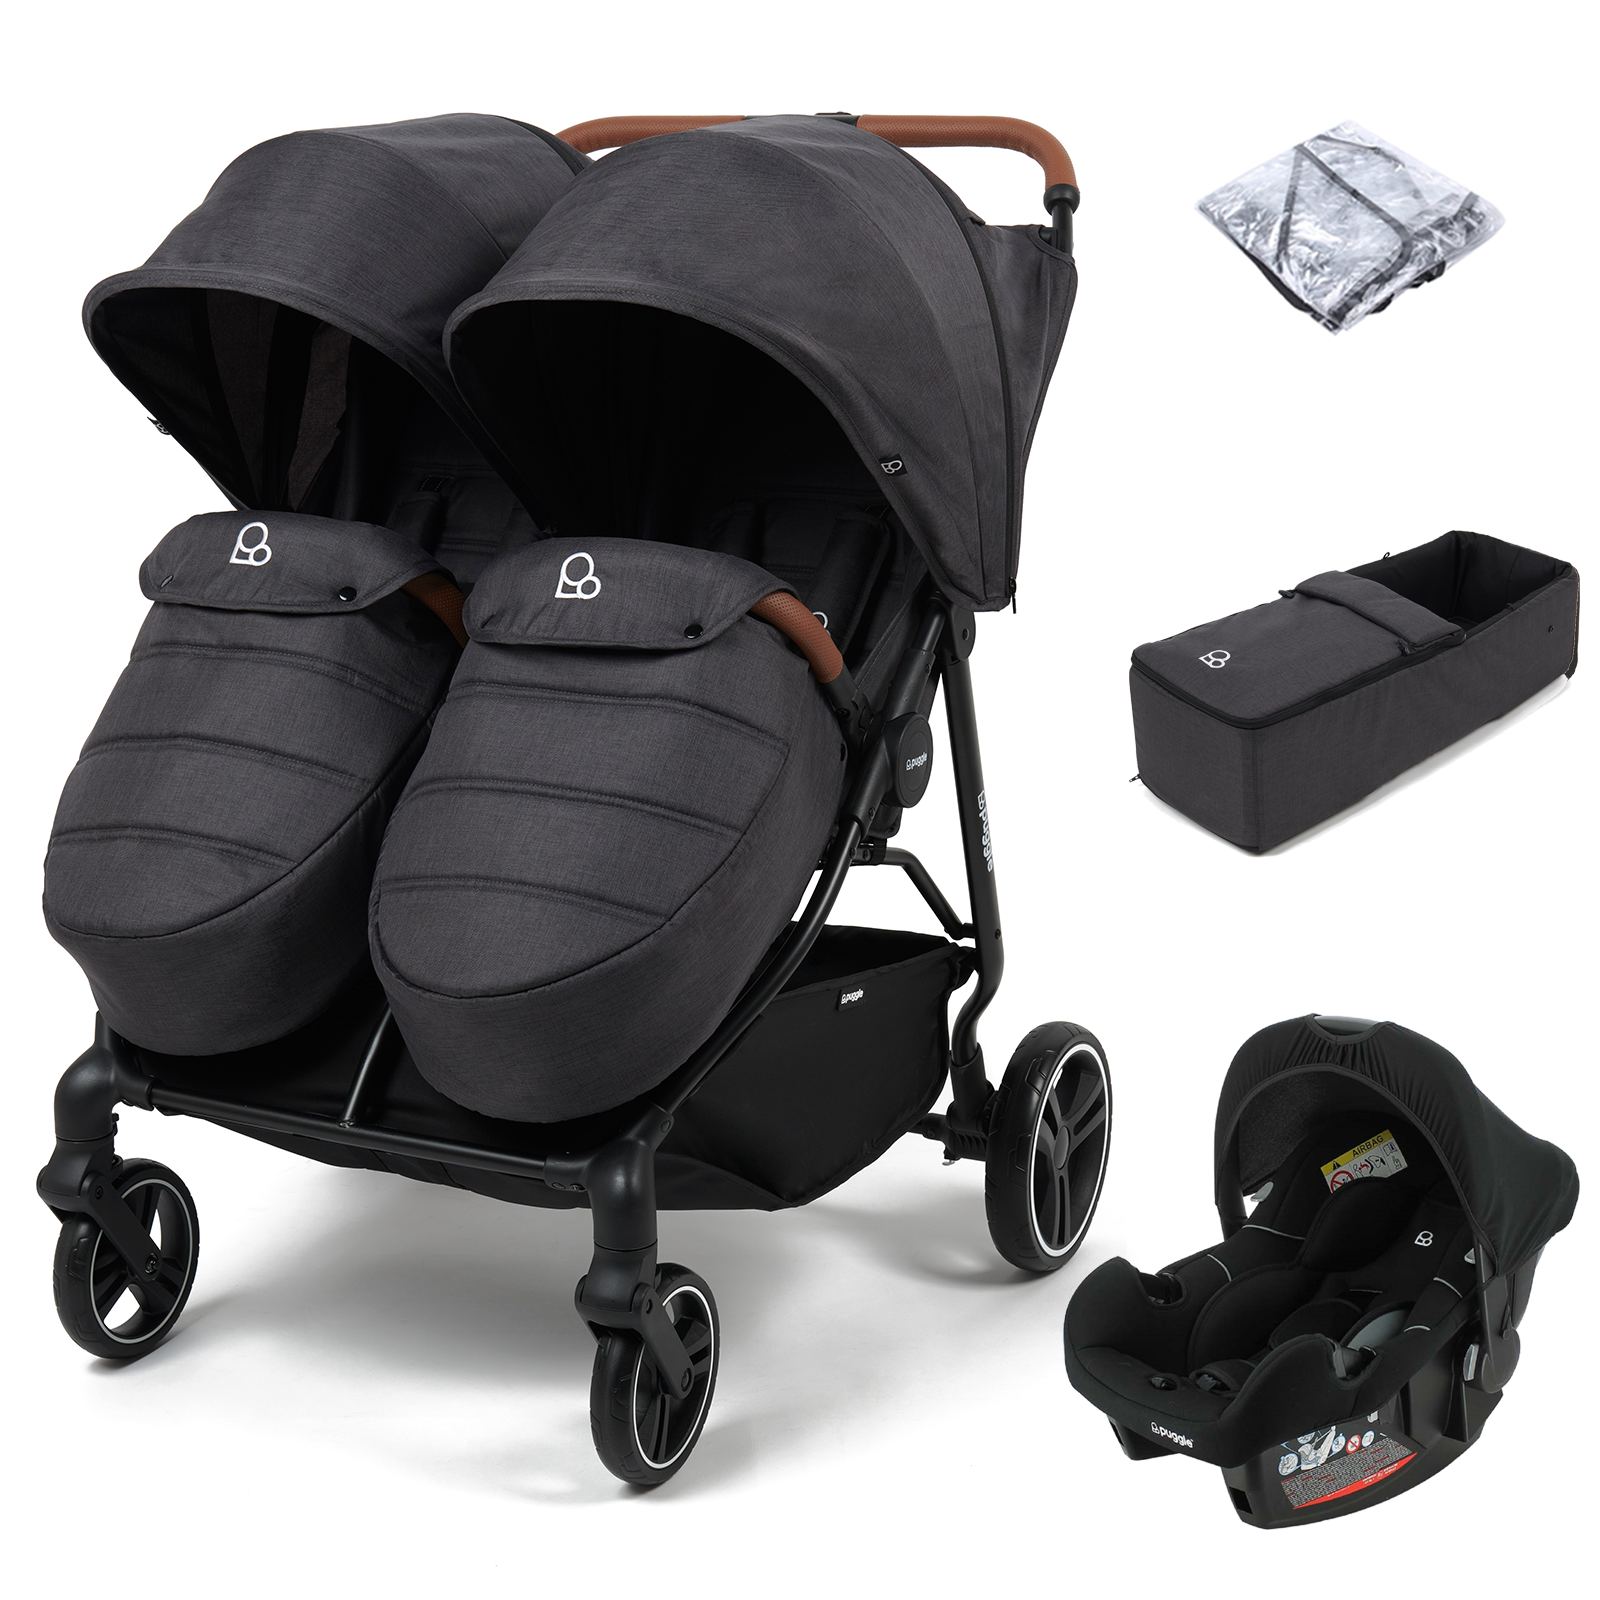 Puggle Urban City Easyfold Twin (Alston Car Seat) Travel System Bundle with +1 Soft Carrycot - Slate Grey